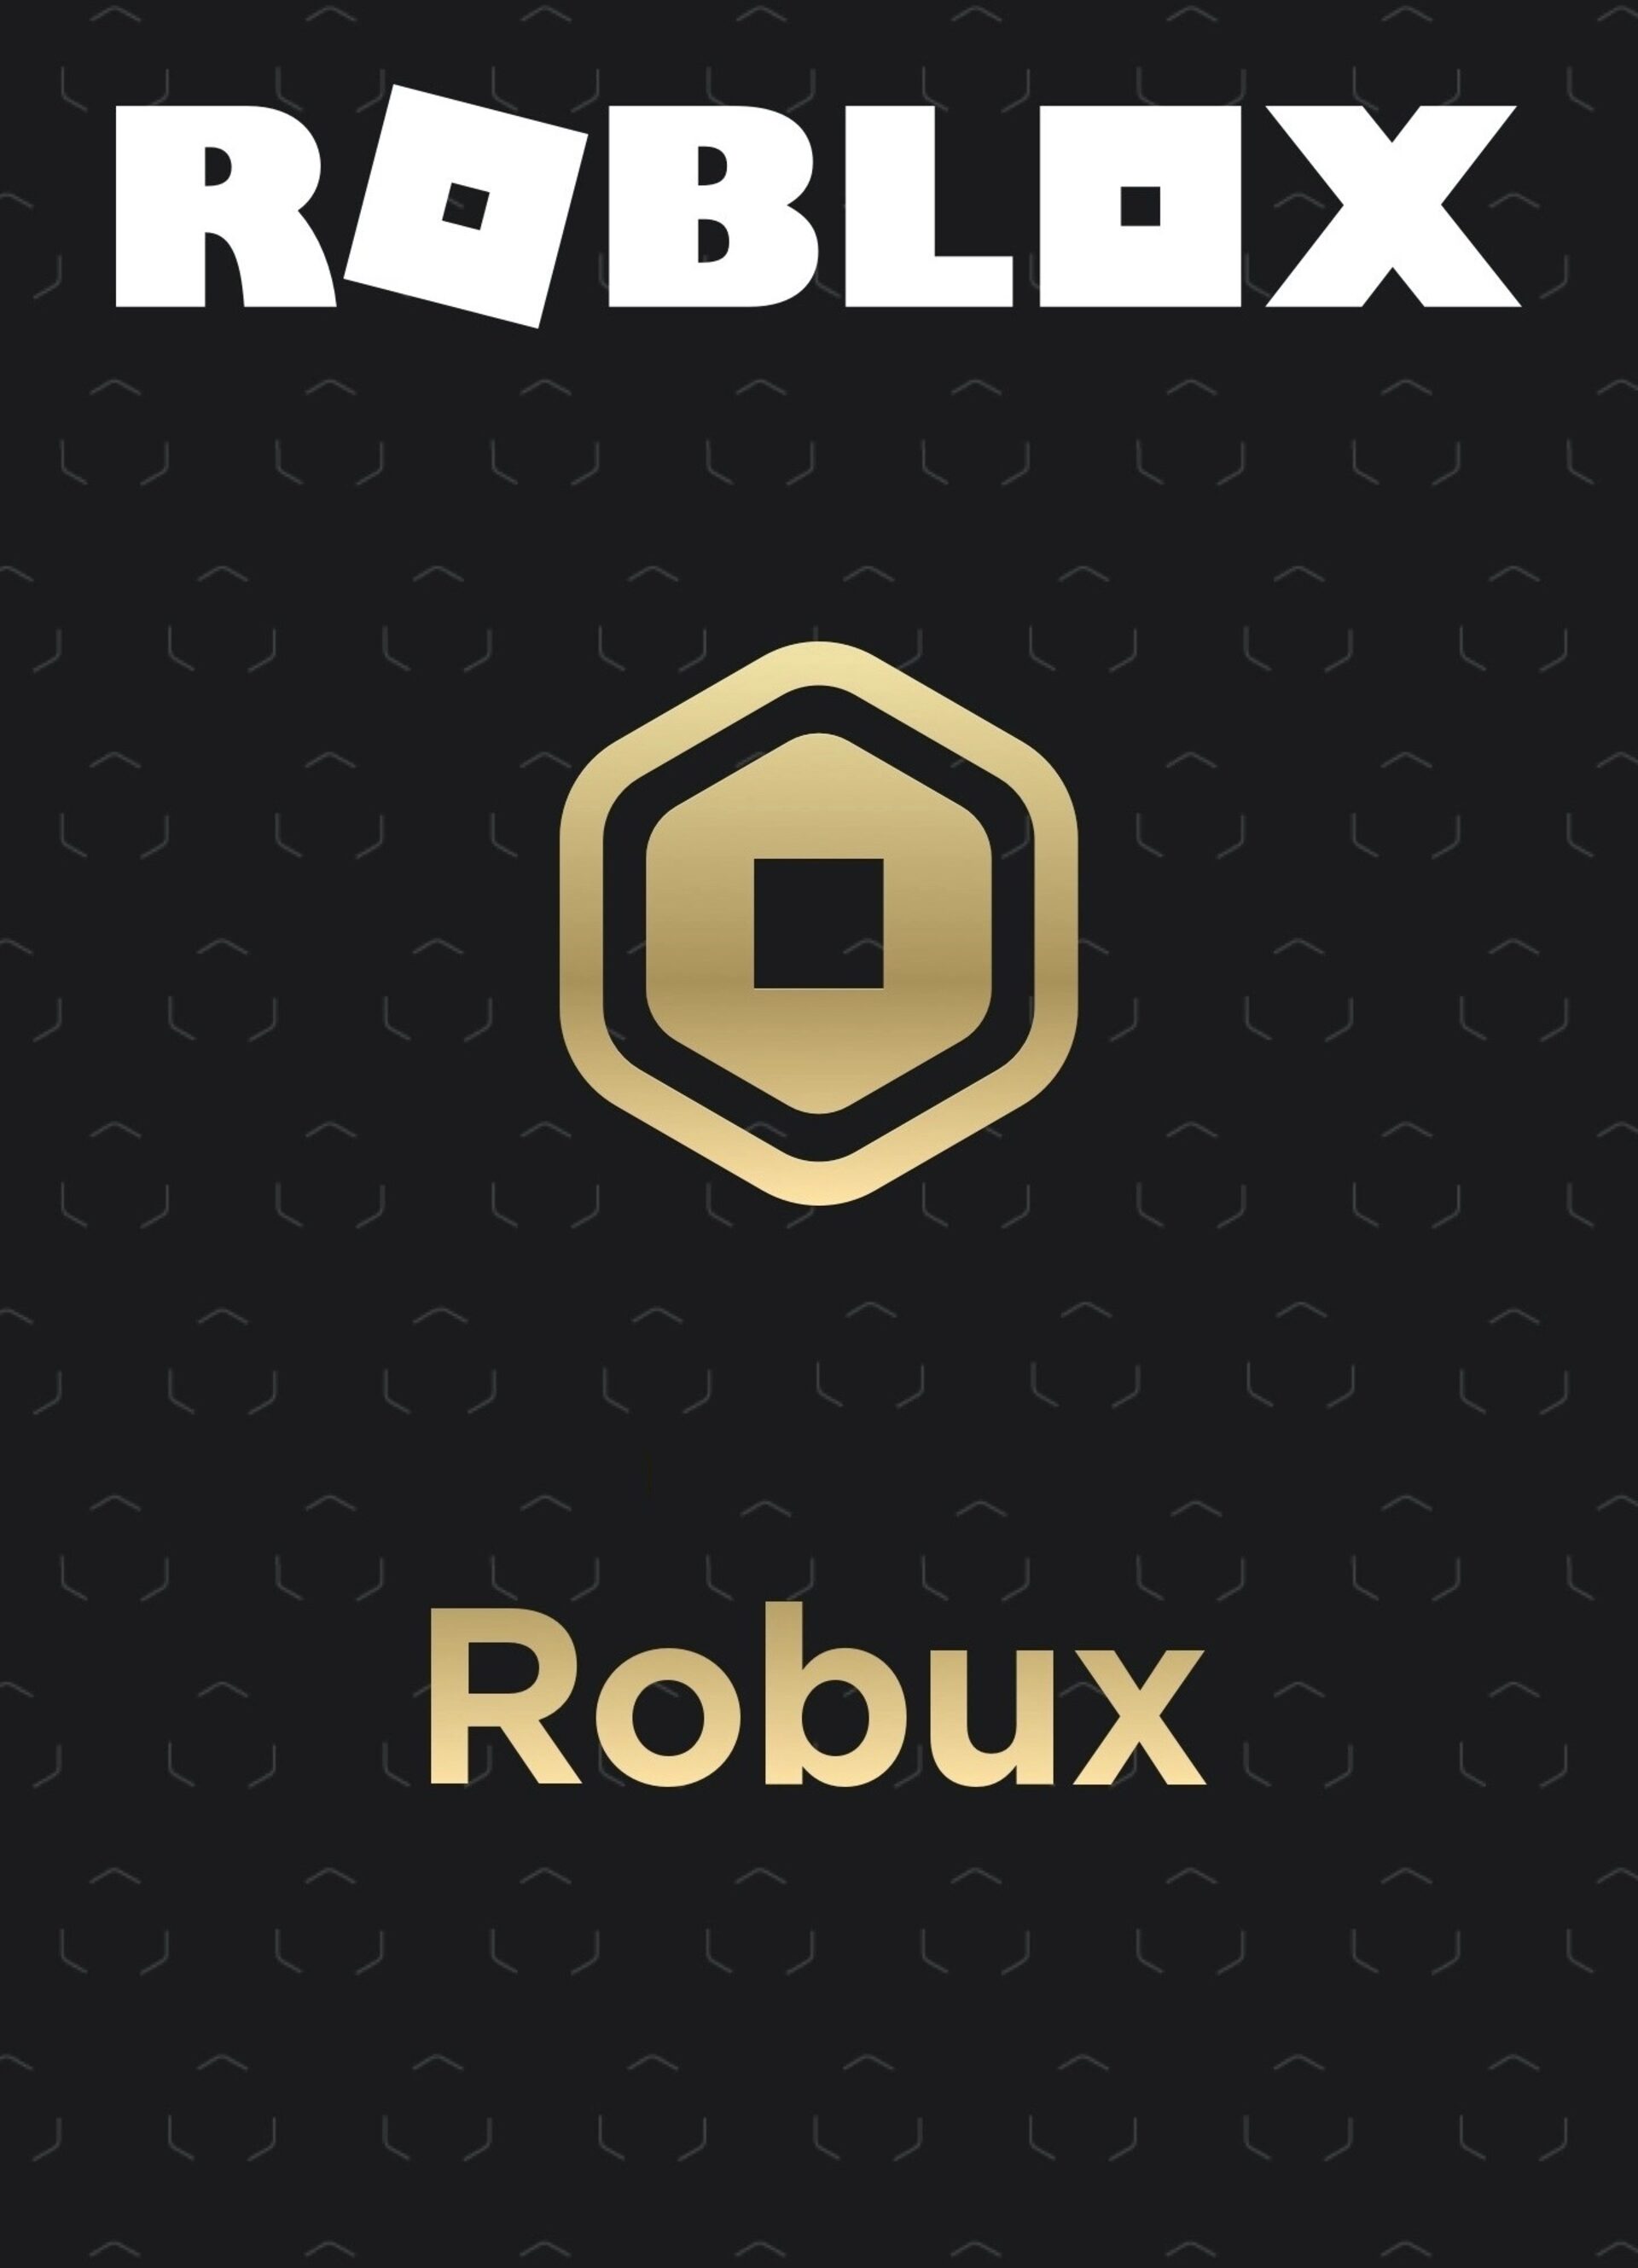  Roblox Digital Gift Code for 16,000 Robux [Redeem